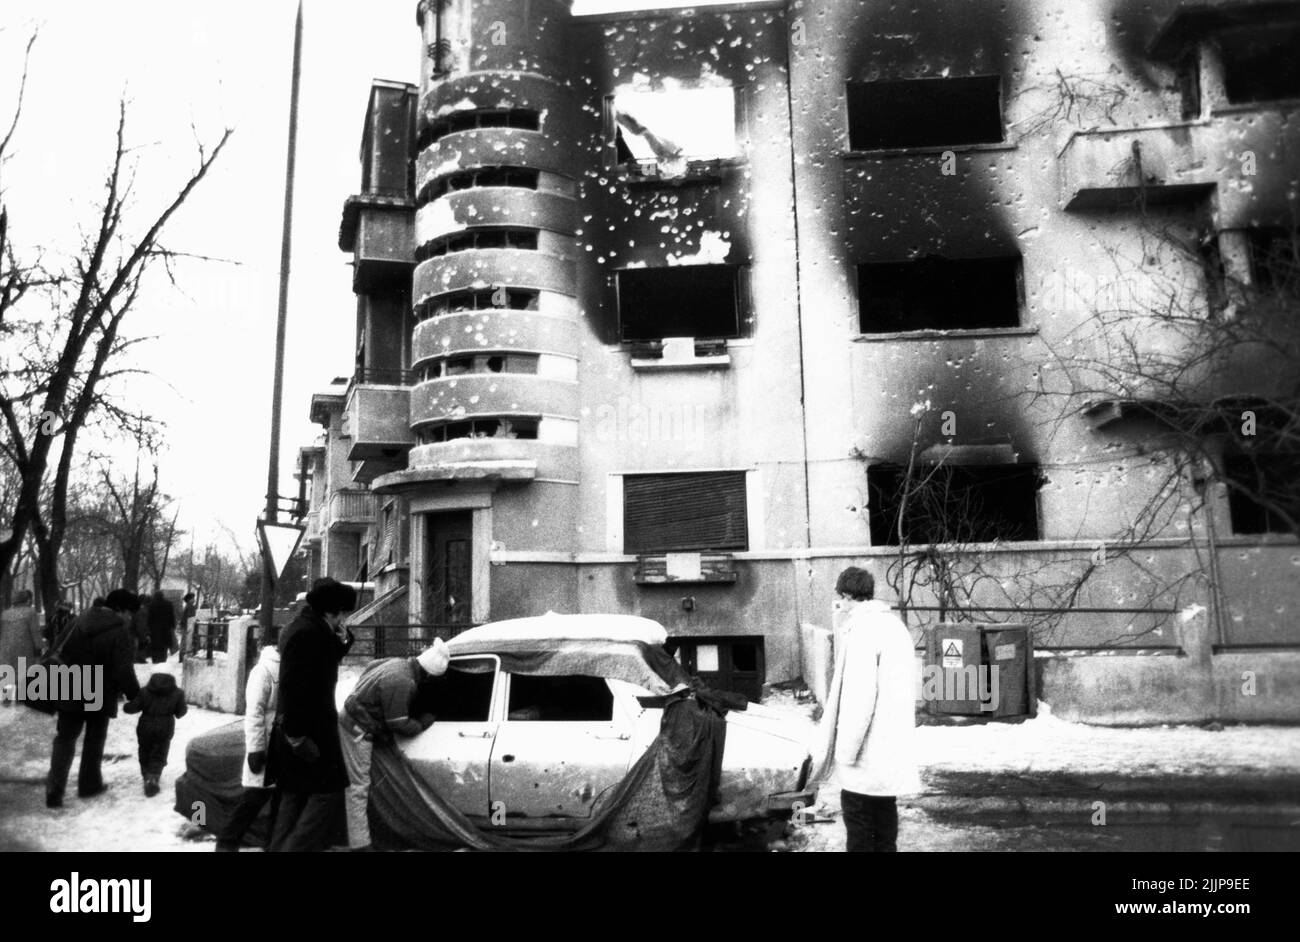 Bucharest, Romania, January 1990. Residential buildings in the historic center and vehicle deteriorated by the gunfire during the Romanian anticommunist revolution of December 1989. Stock Photo